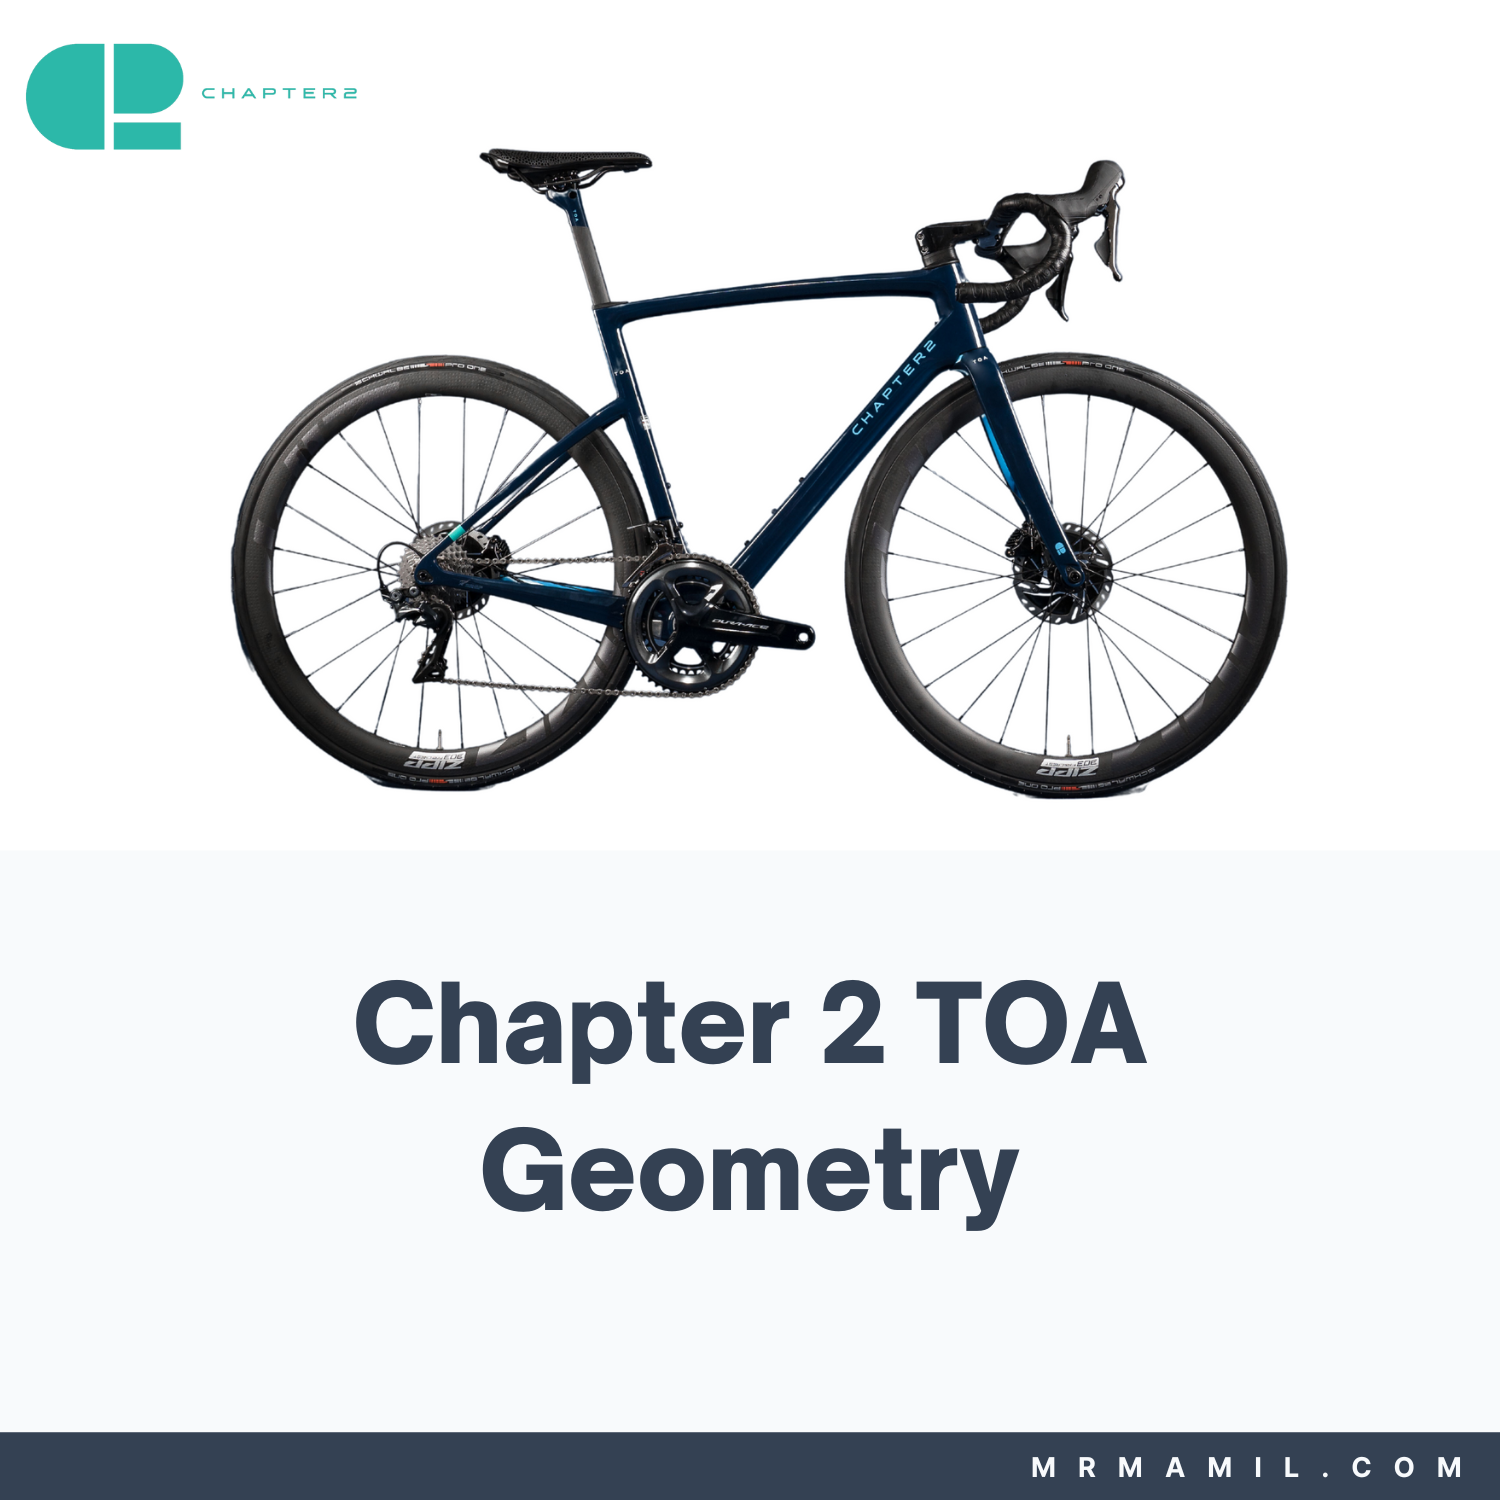 Chapter 2 TOA Frame Geometry